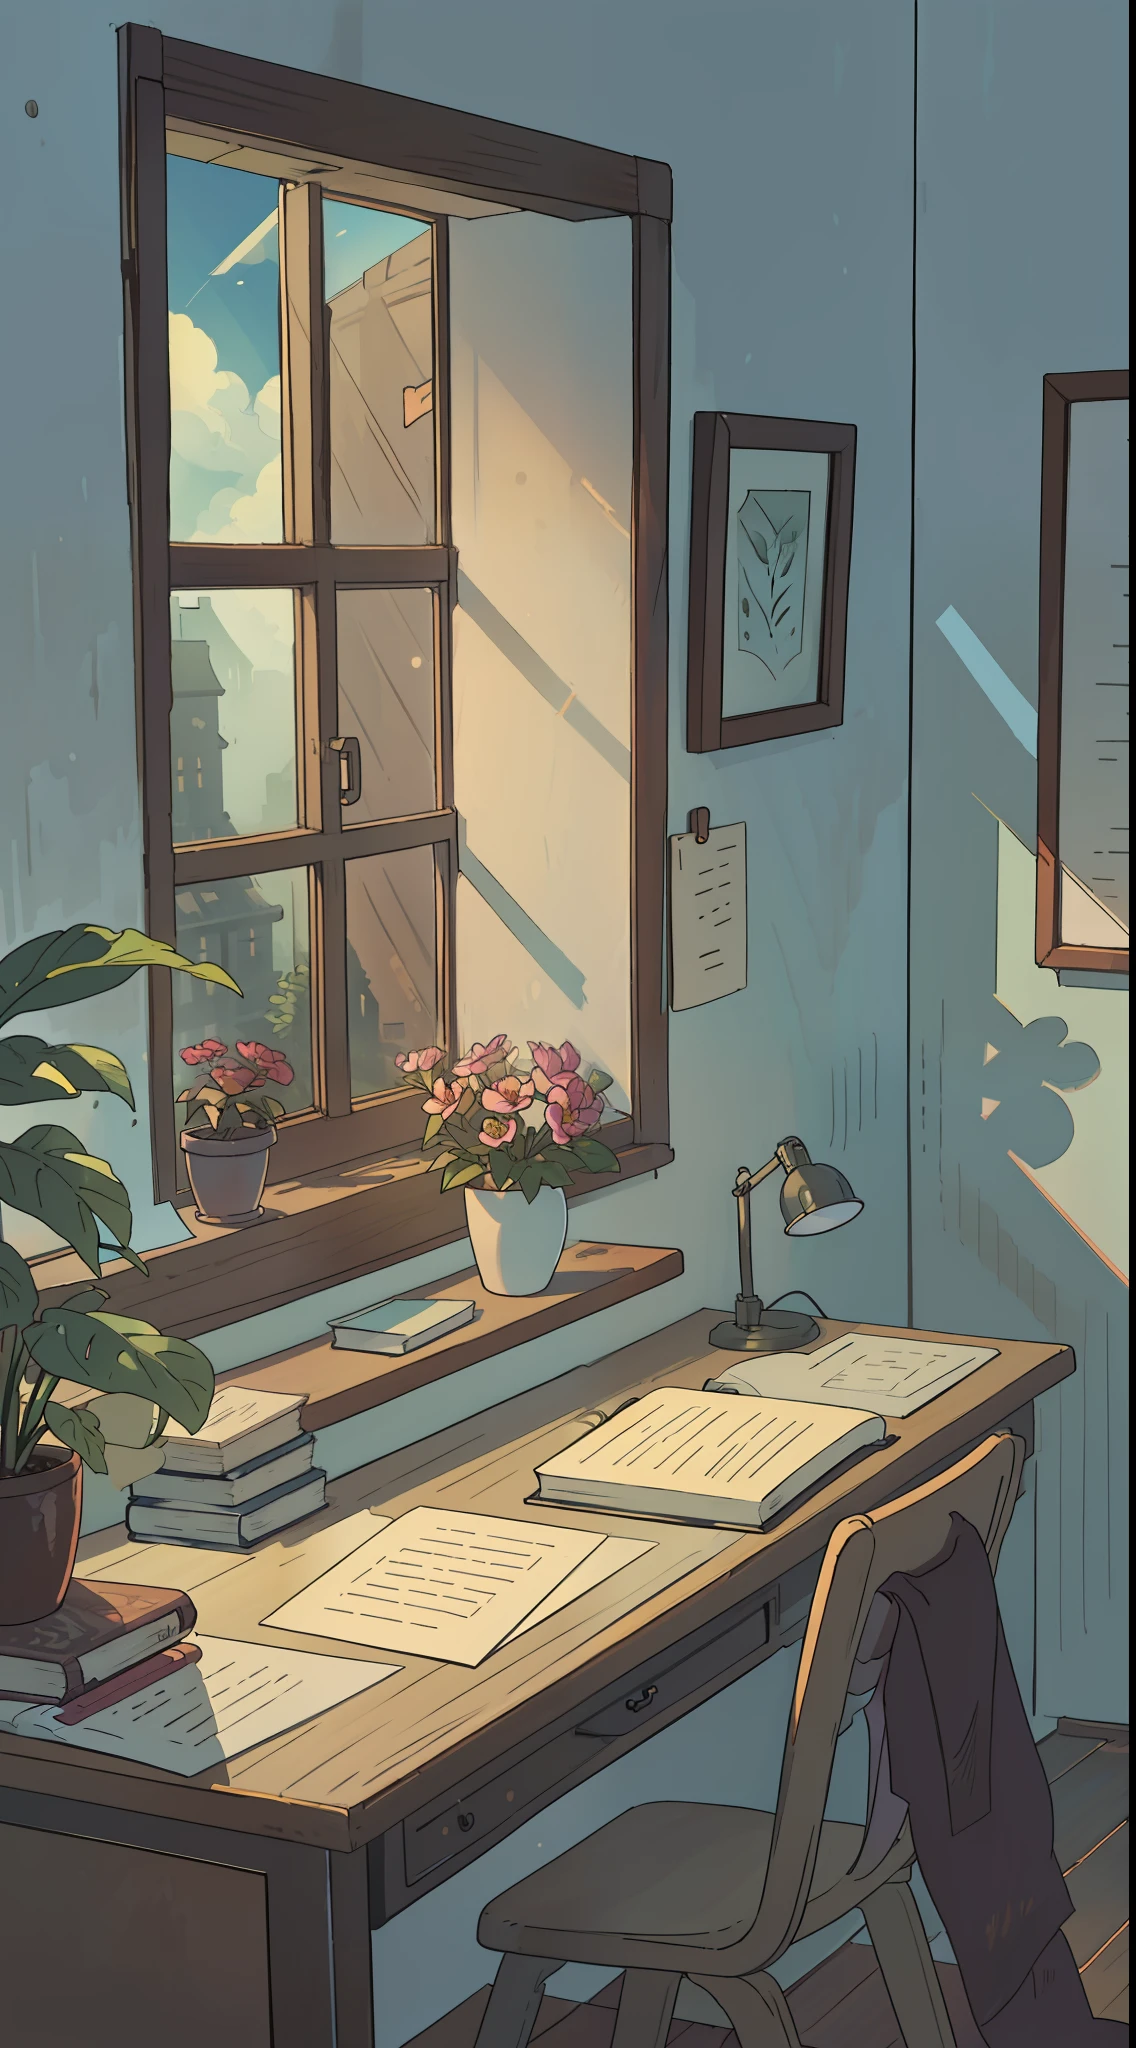 A masterpiece，the best qualityt，high qualit，early in the morning，The desk is by the window，Sunlight shines through the window on the desk top，There are flowers by the window，Plante，book